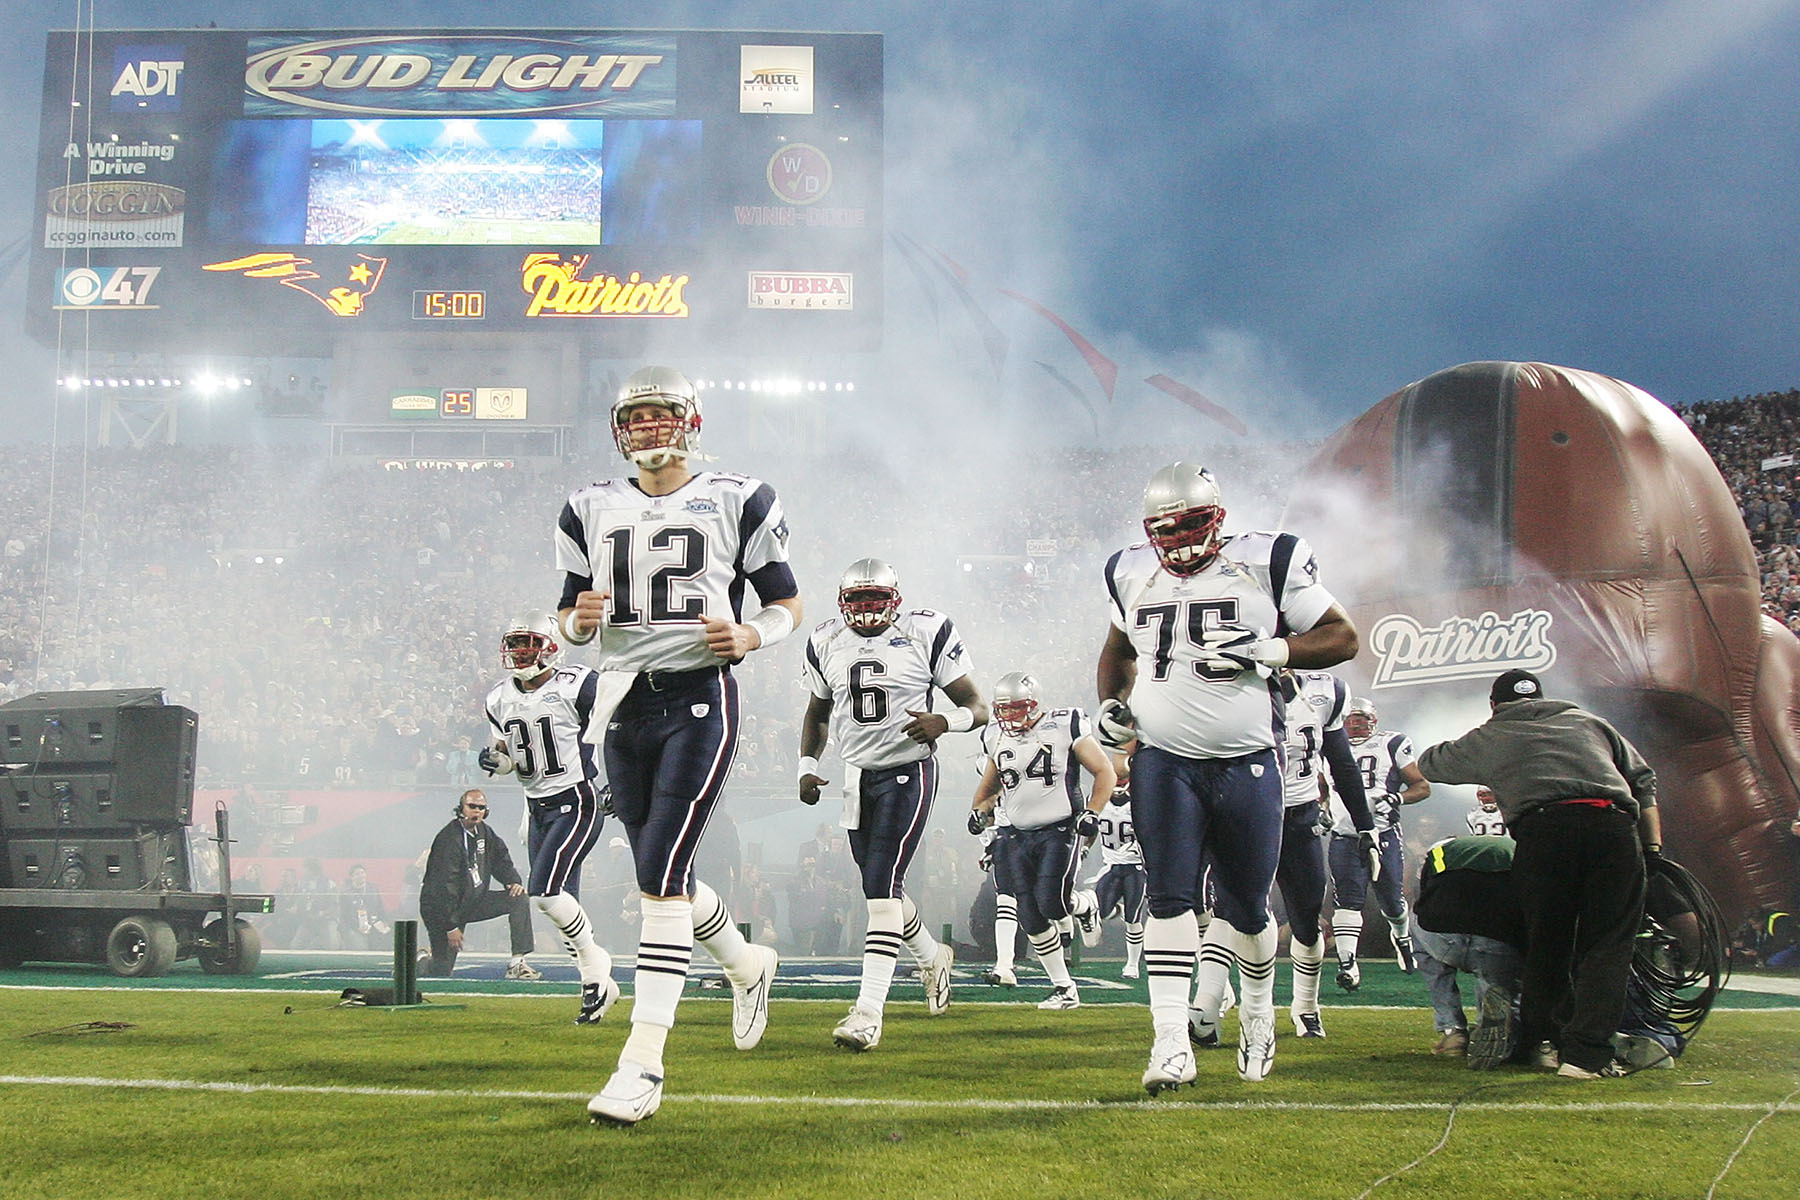 Quarterback Tom Brady #12 of the New England Patriots leads his team onto the field before the start of Super Bowl XXXIX against the Philadelphia Eagles at Alltel Stadium on February 6, 2005 in Jacksonville, Florida. 